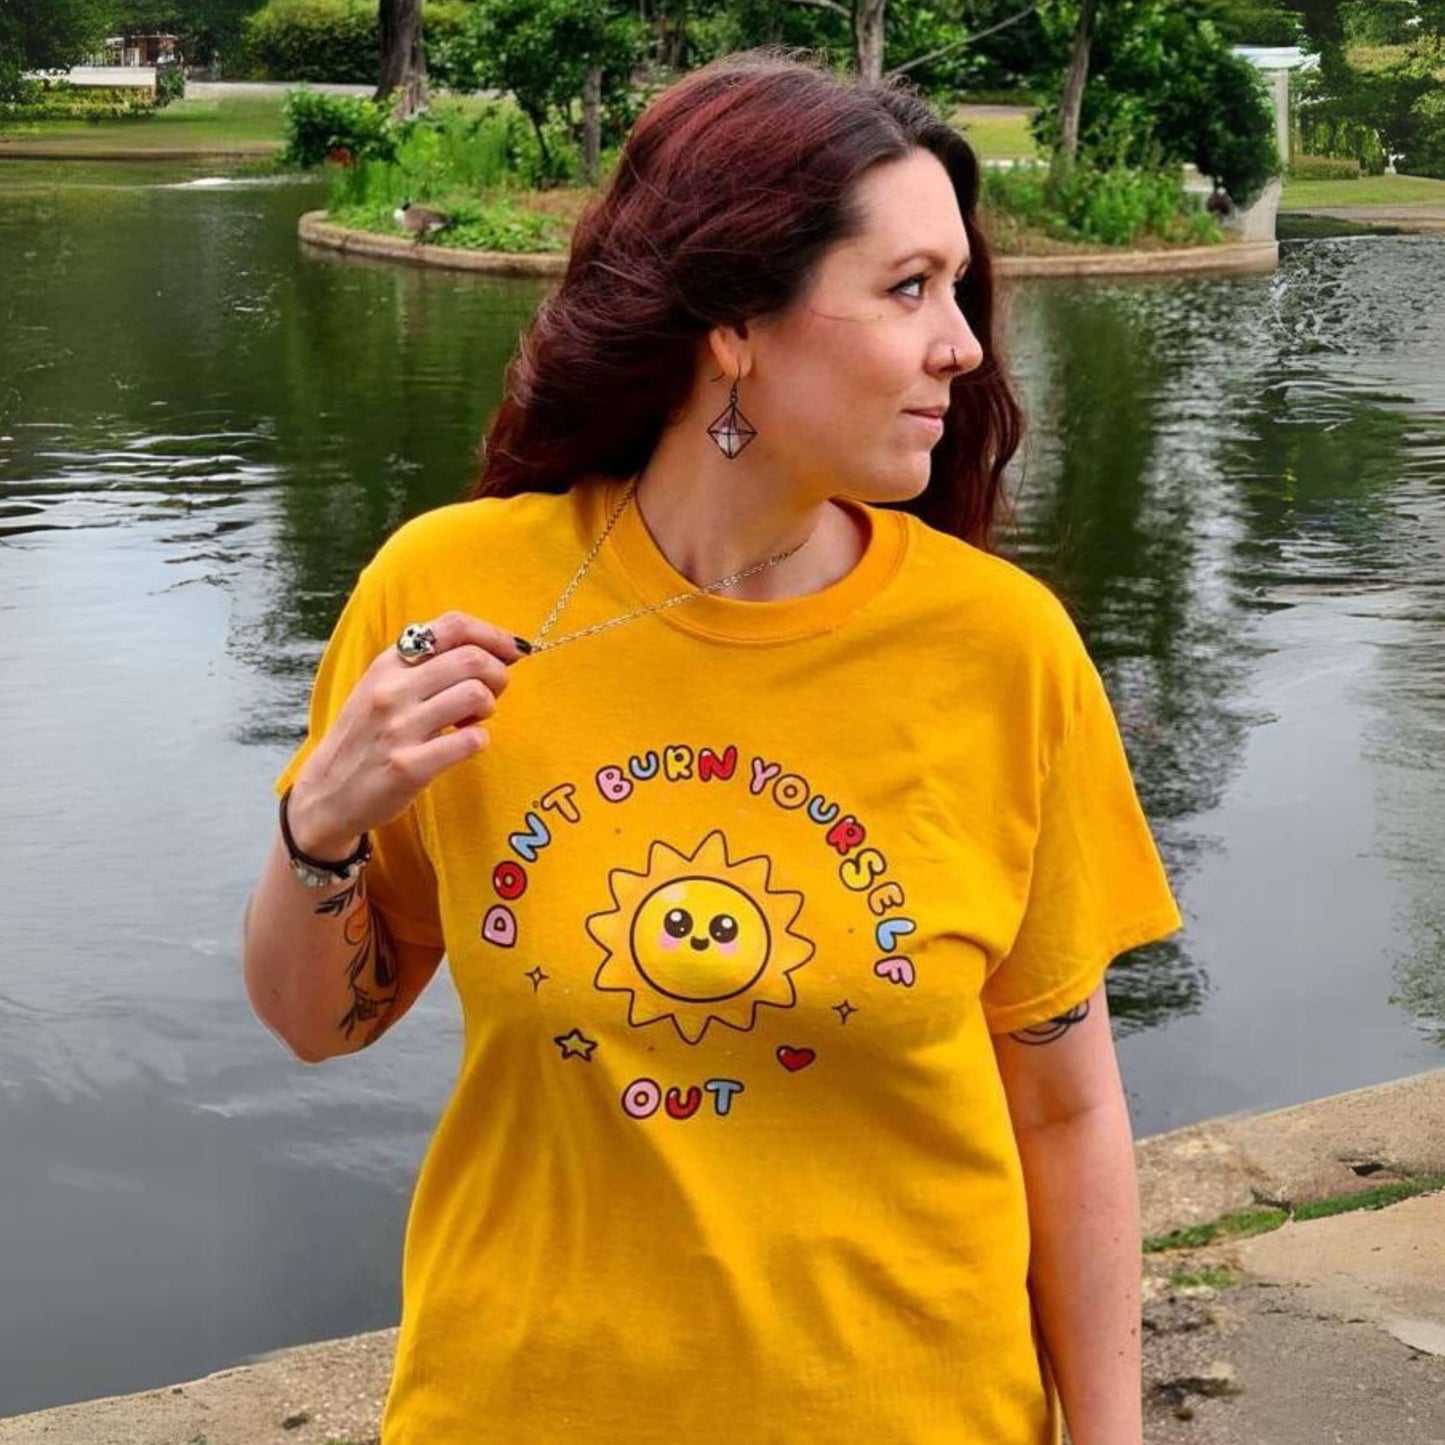 The Don't Burn Yourself Out Tee modelled by the innabox owner, Nikky, who has brown long hair and tattoos. She is stood outside smiling looking off to the right in front of a large pond with greenery. The yellow base cotton tshirt features a smiling happy sunshine with red, yellow and blue polka dots, a red heart, a yellow star and black sparkles surrounding it. Around the sunshine in rainbow bubble writing reads 'don't burn yourself out'. The design is a gentle reminder to practise self care.